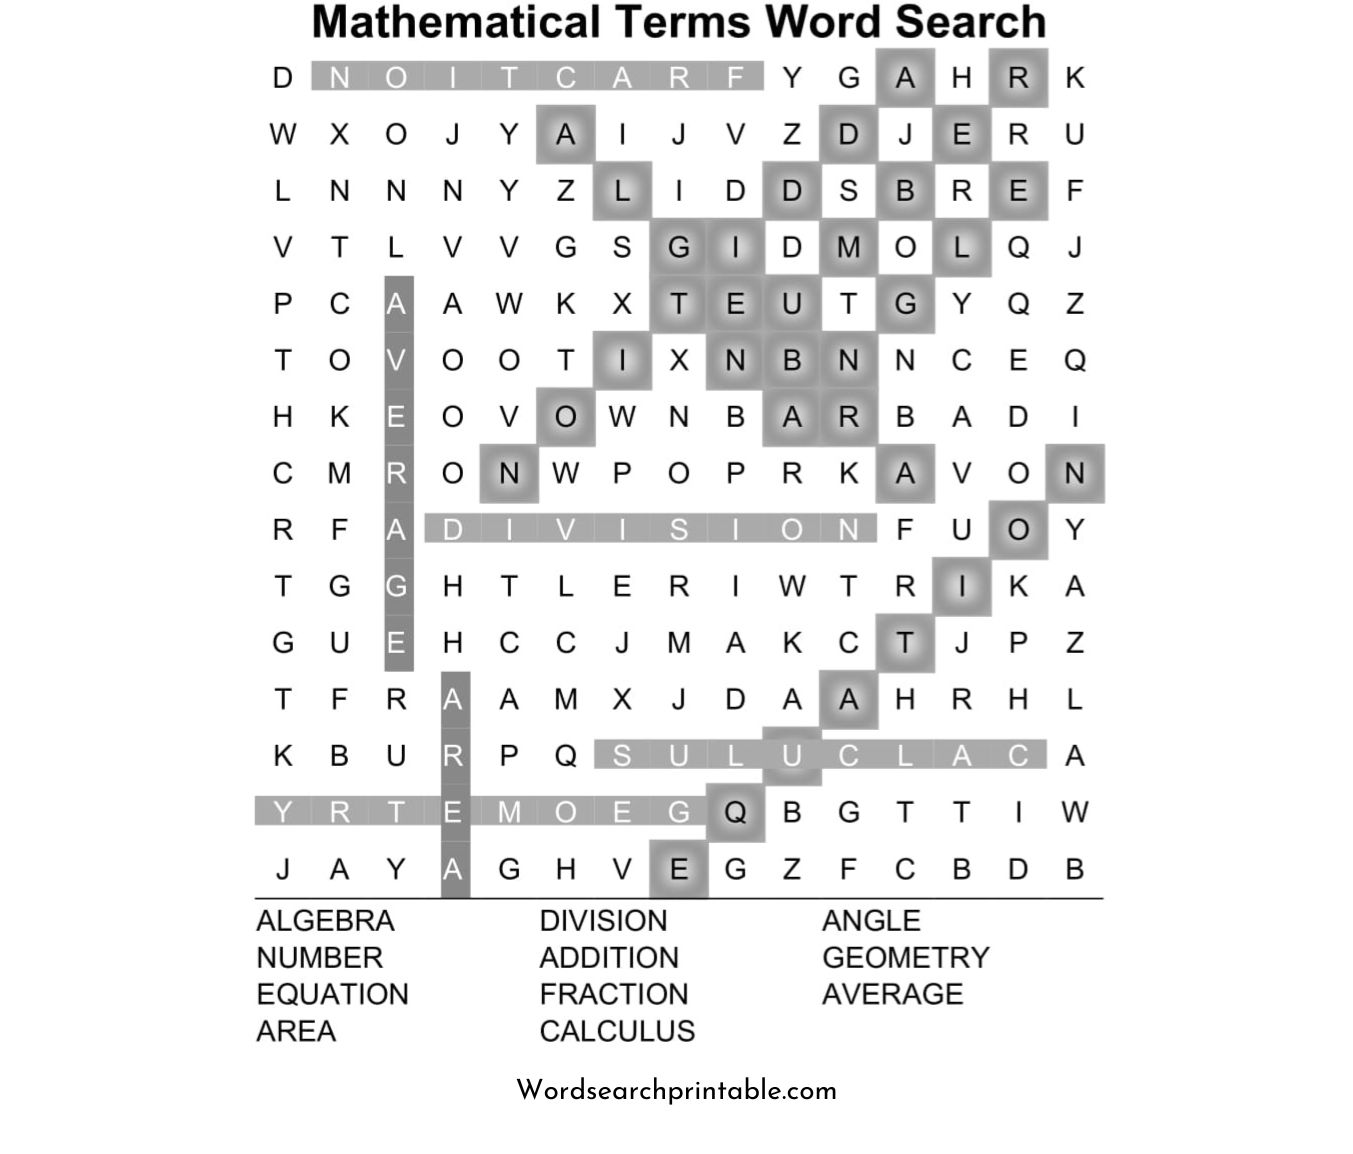 mathematical terms word search puzzle solution